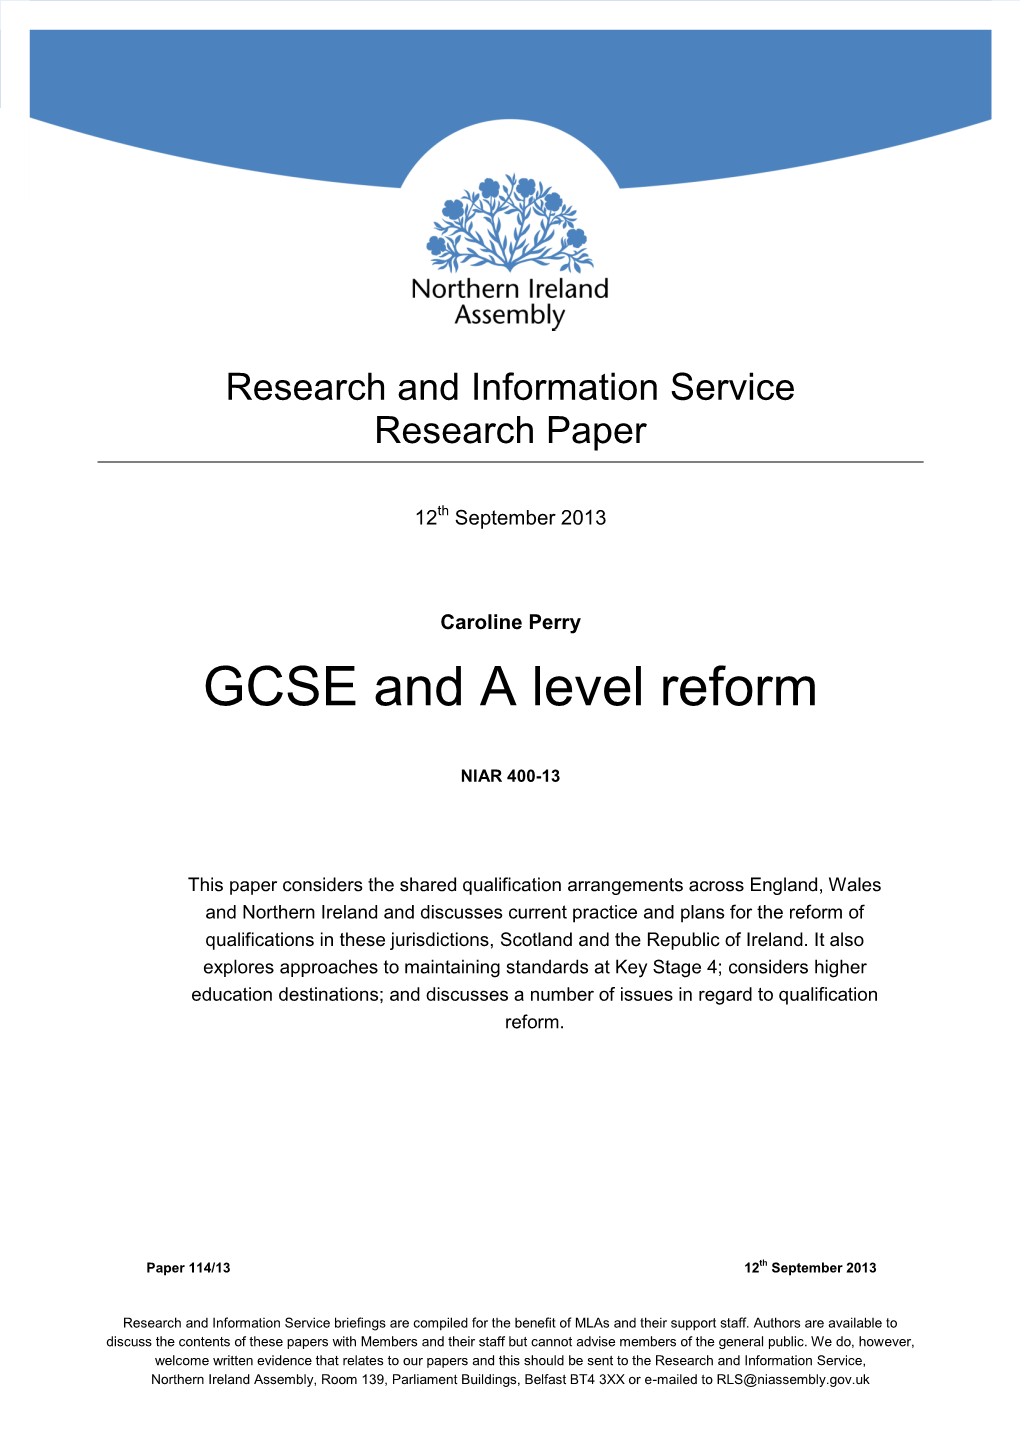 GCSE and a Level Reform